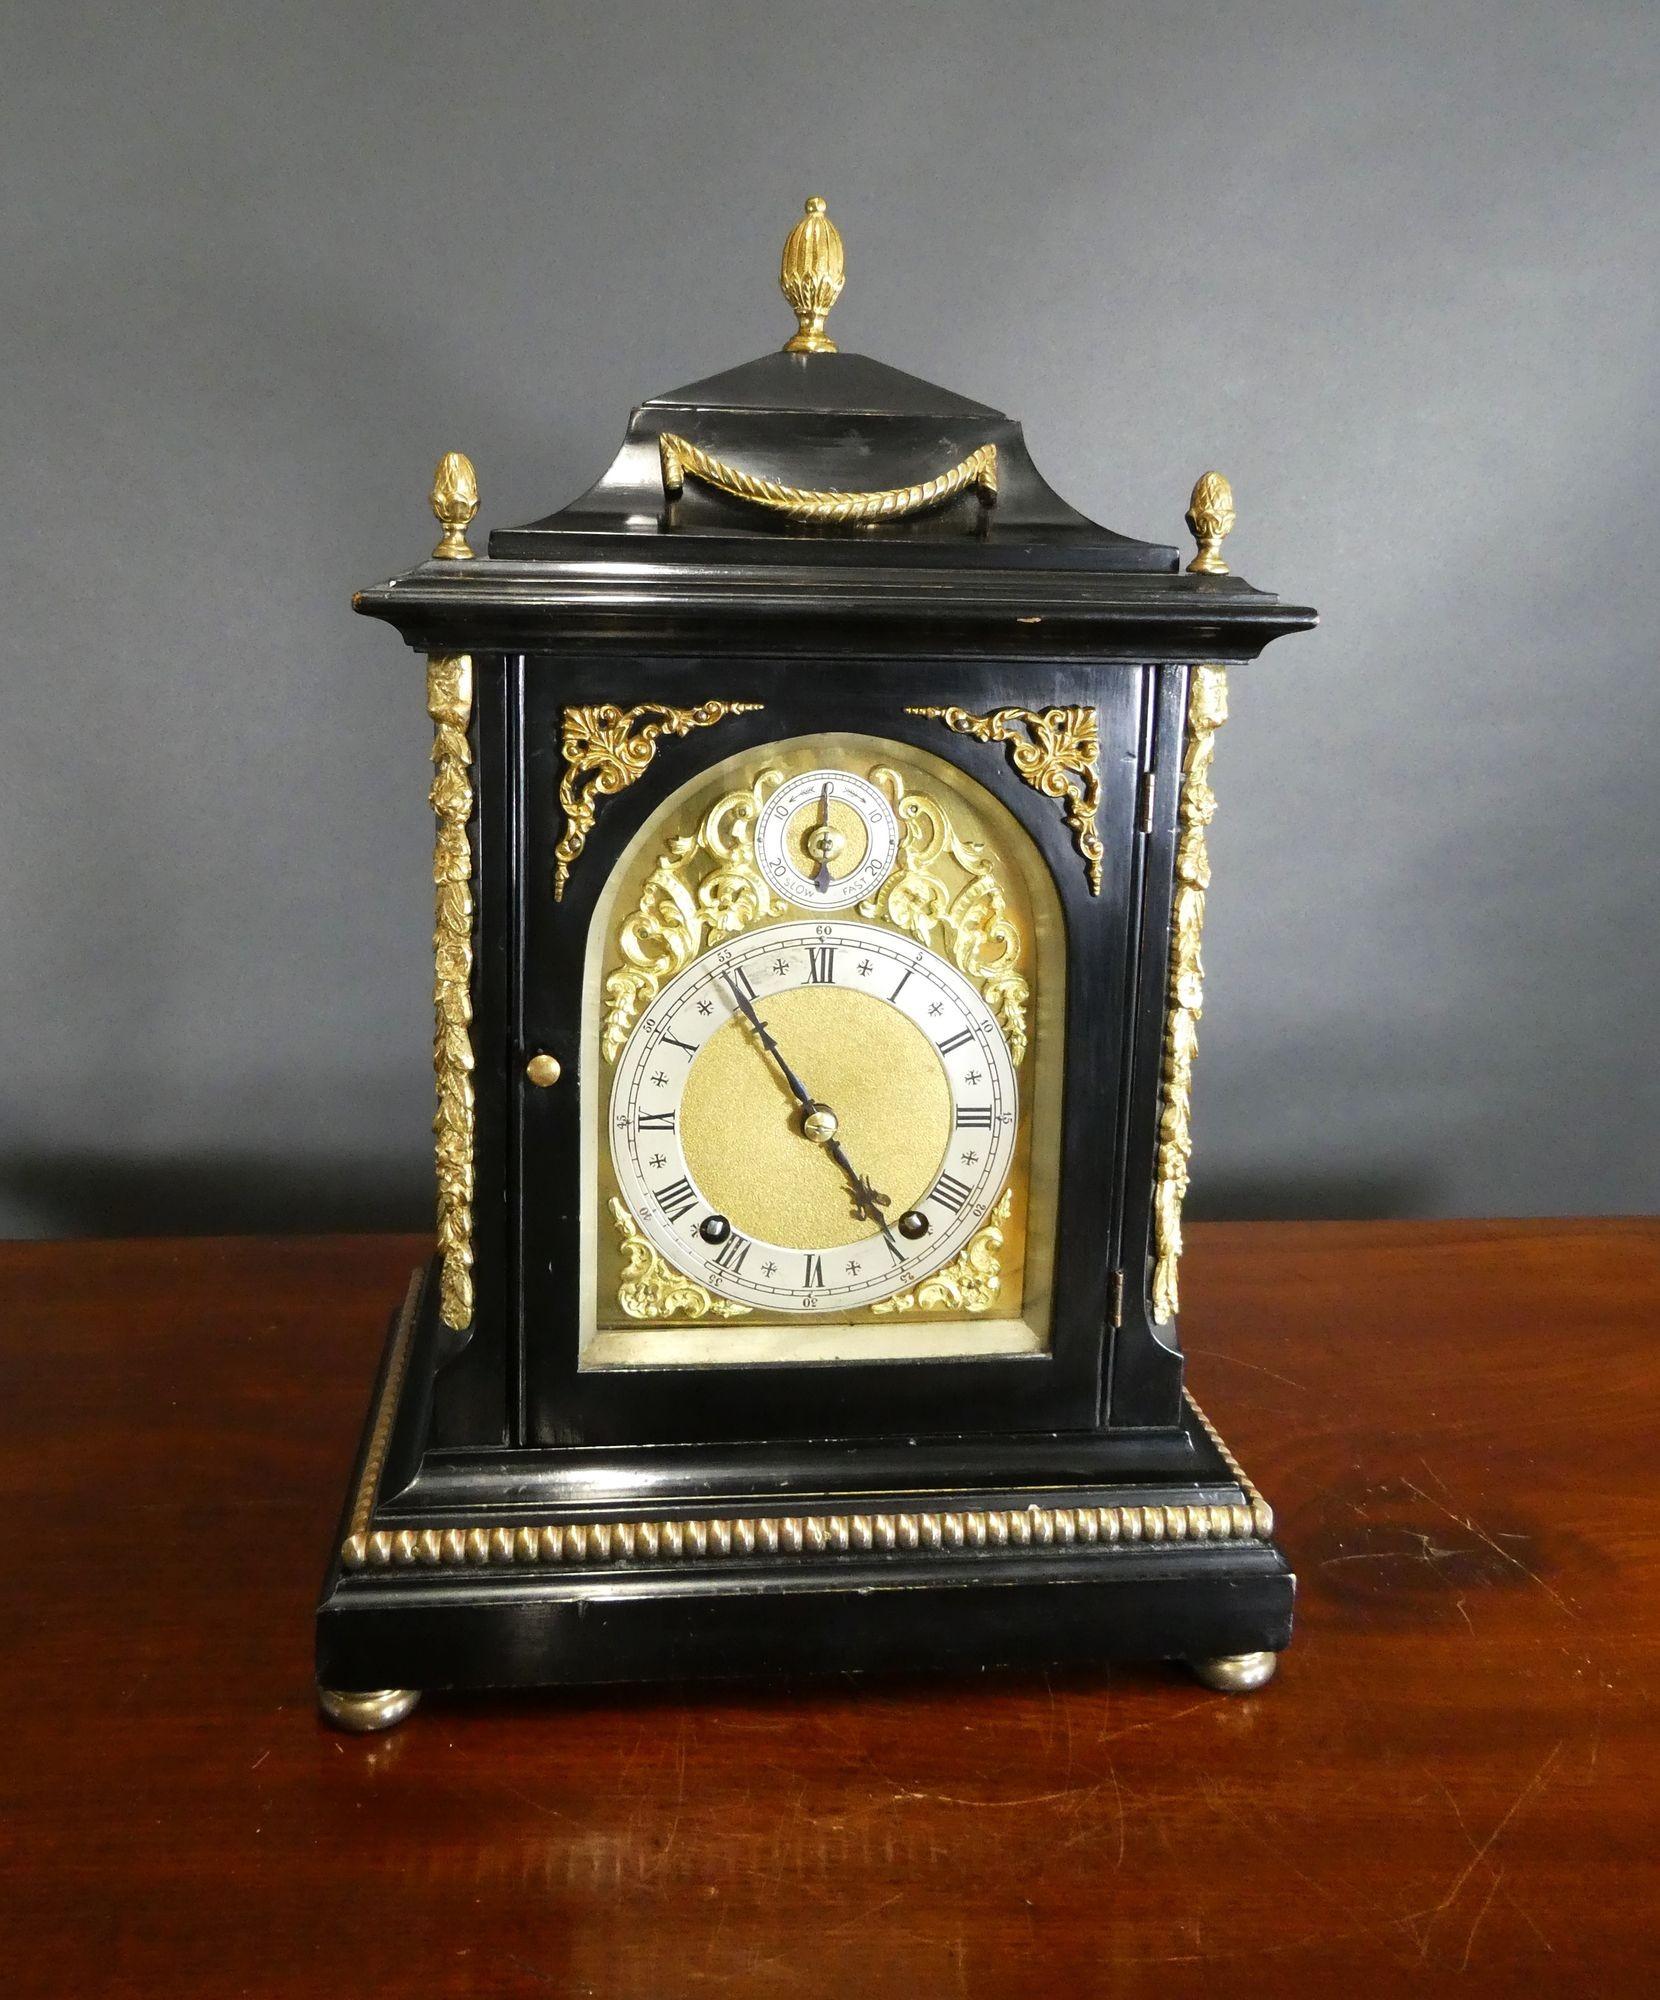 Victorian Ebonised Ting-Tang Mantel Clock
Victorian mantel clock housed in an ebonised case with applied ormolu mounts, raised stepped plinth with rope decoration and standing on four brass bun feet. Decorated gilded pillars to either side of the